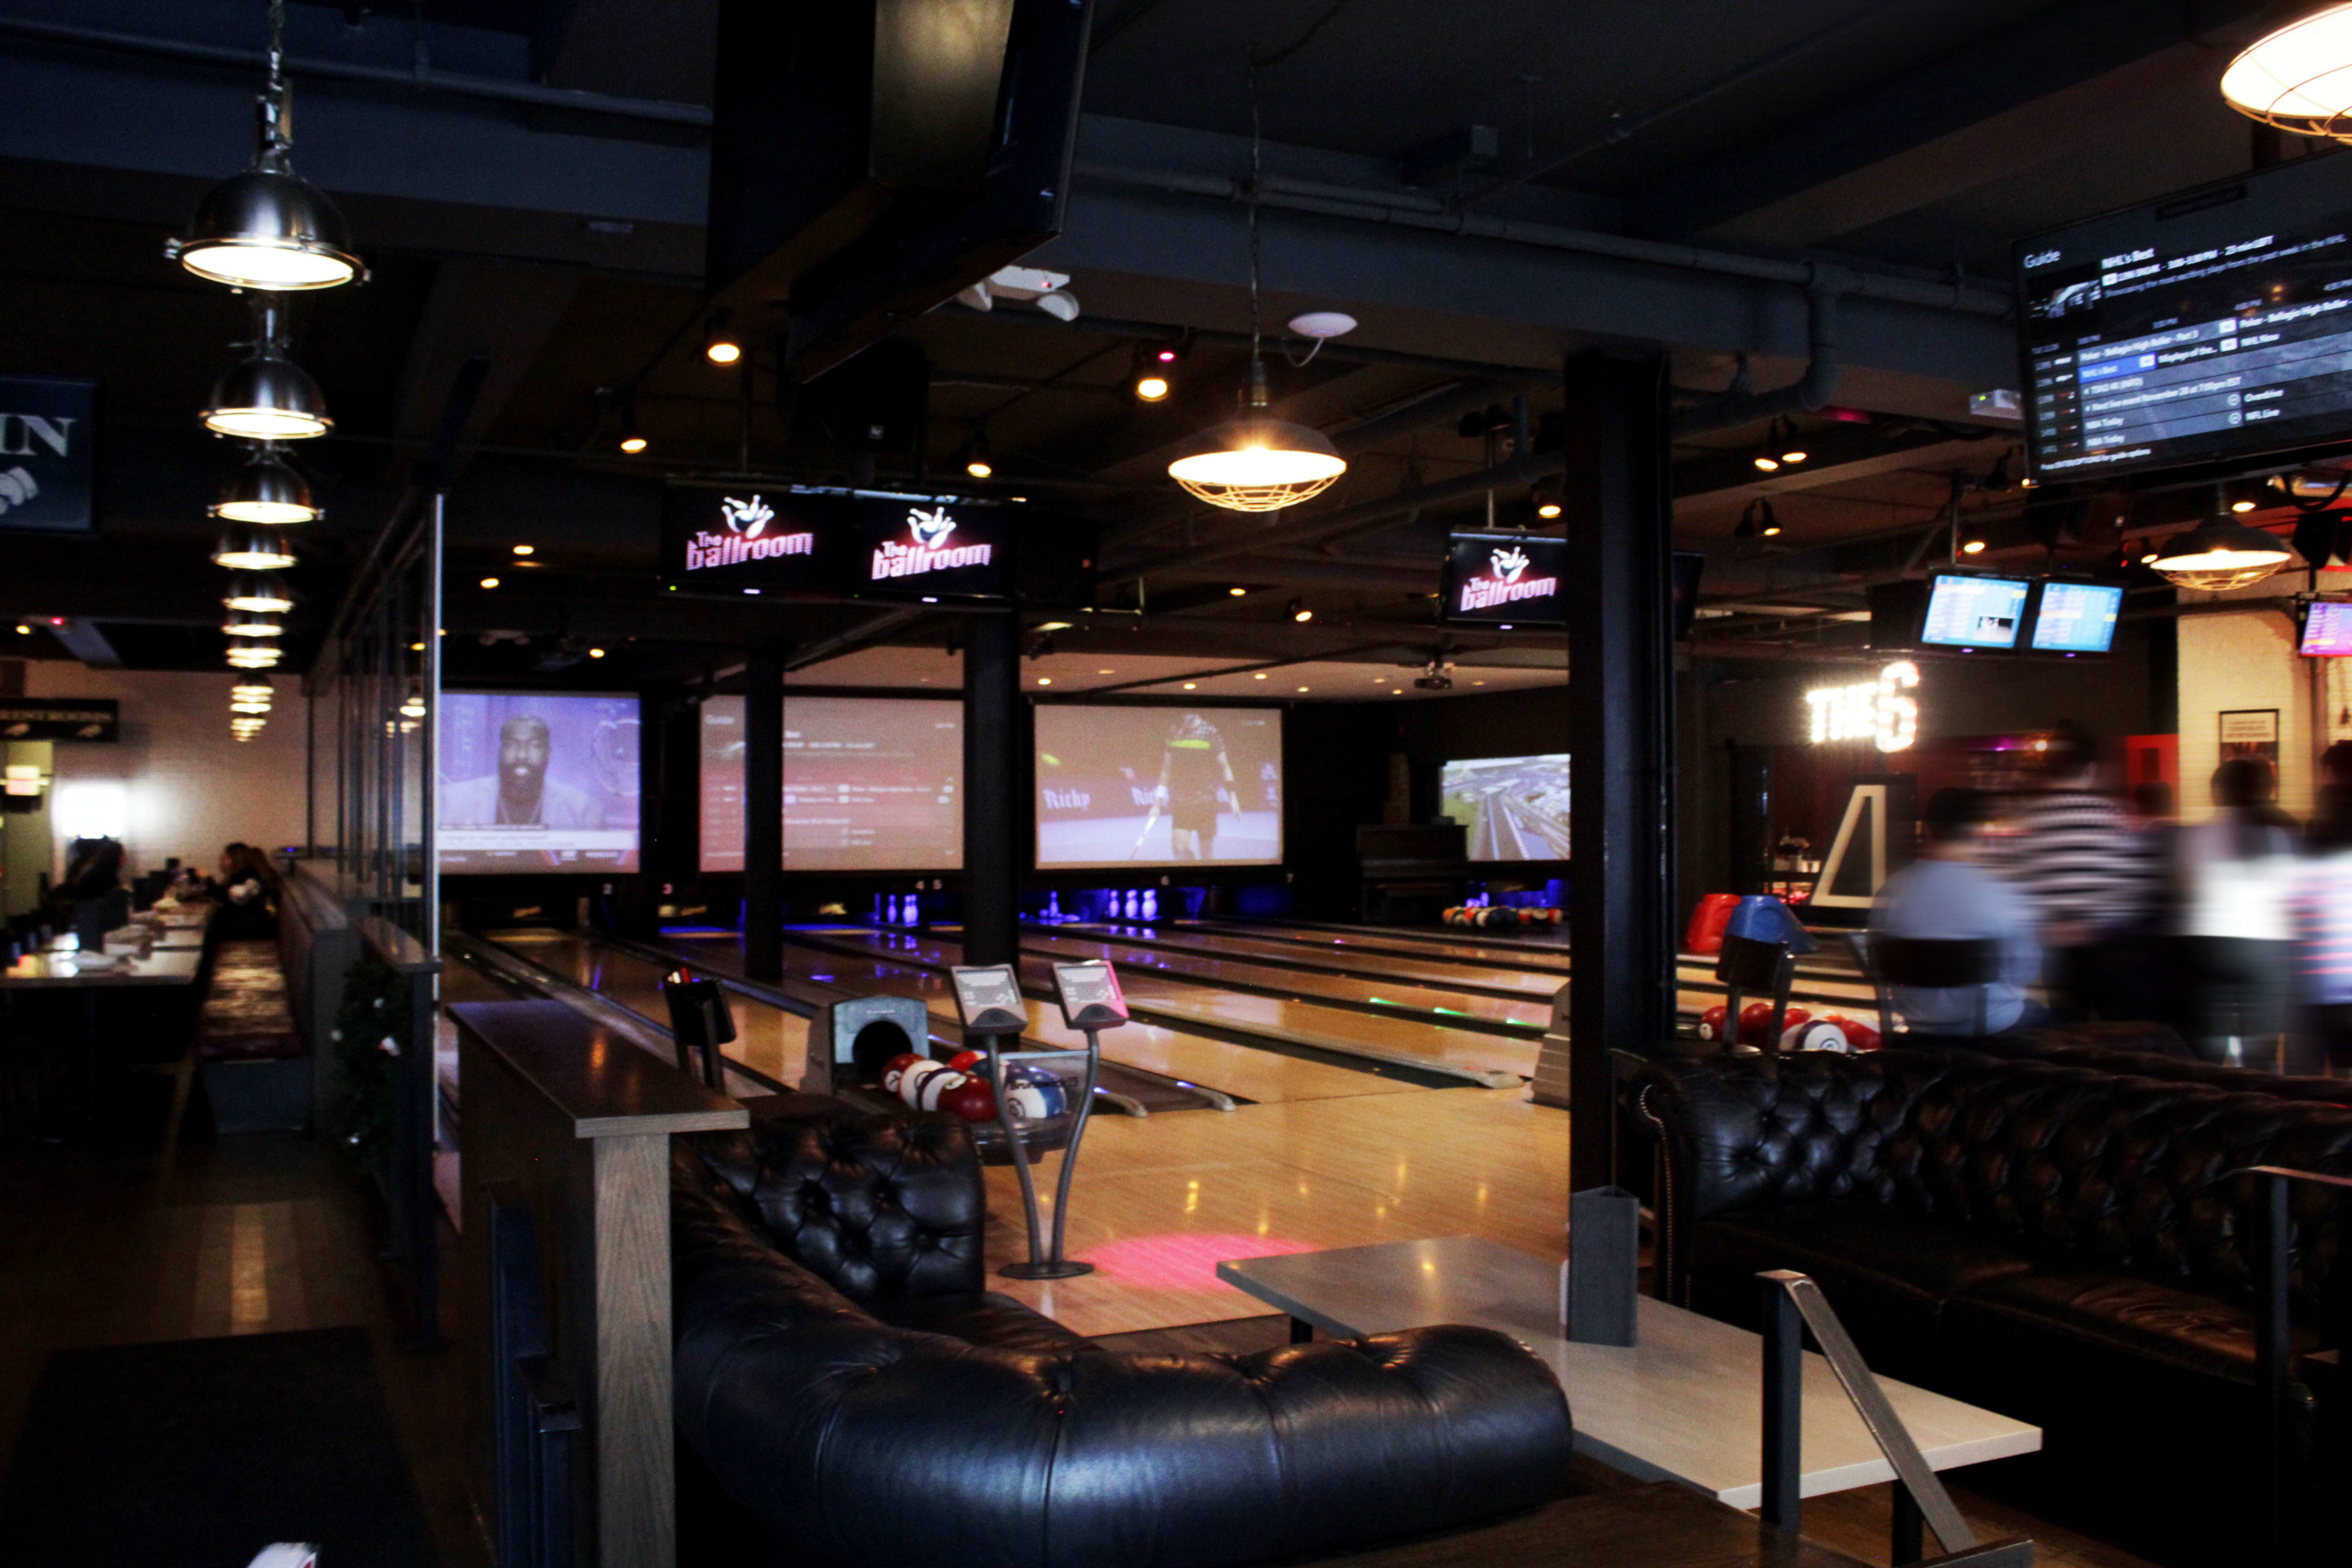 The Ballroom bowling lanes in downtown Toronto